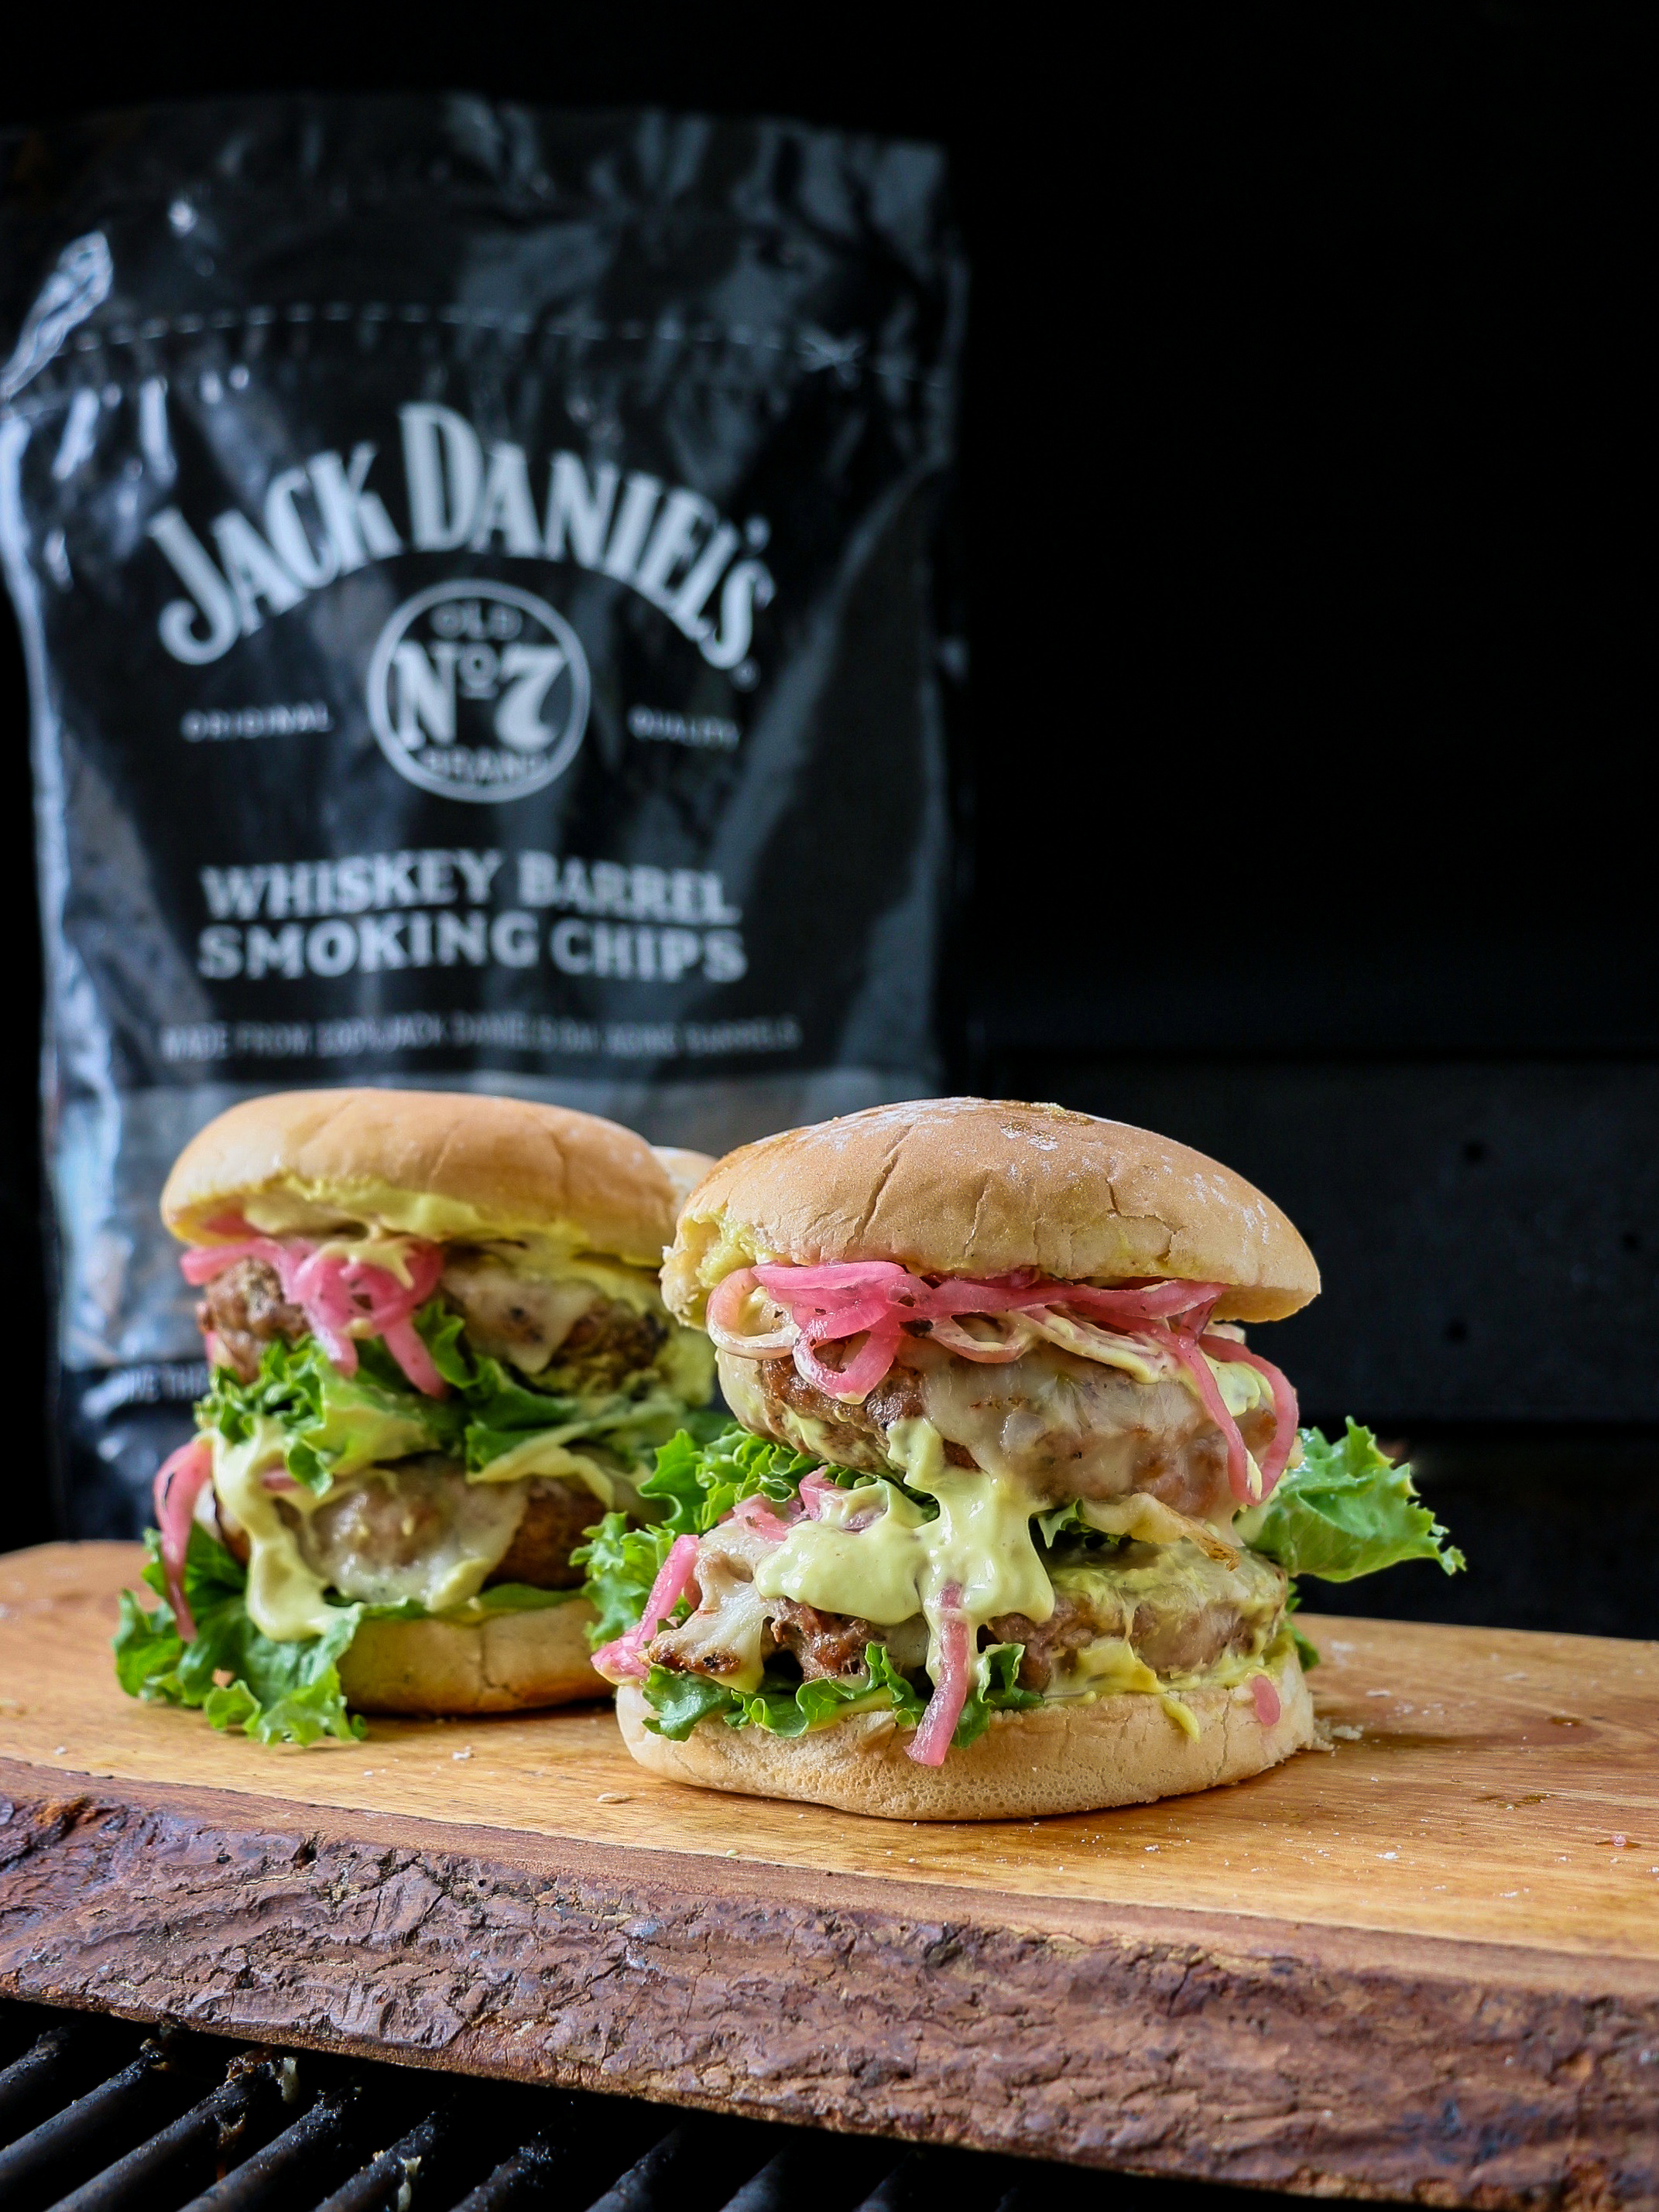 To show the deliciousness of a pork burger and pickled onions.